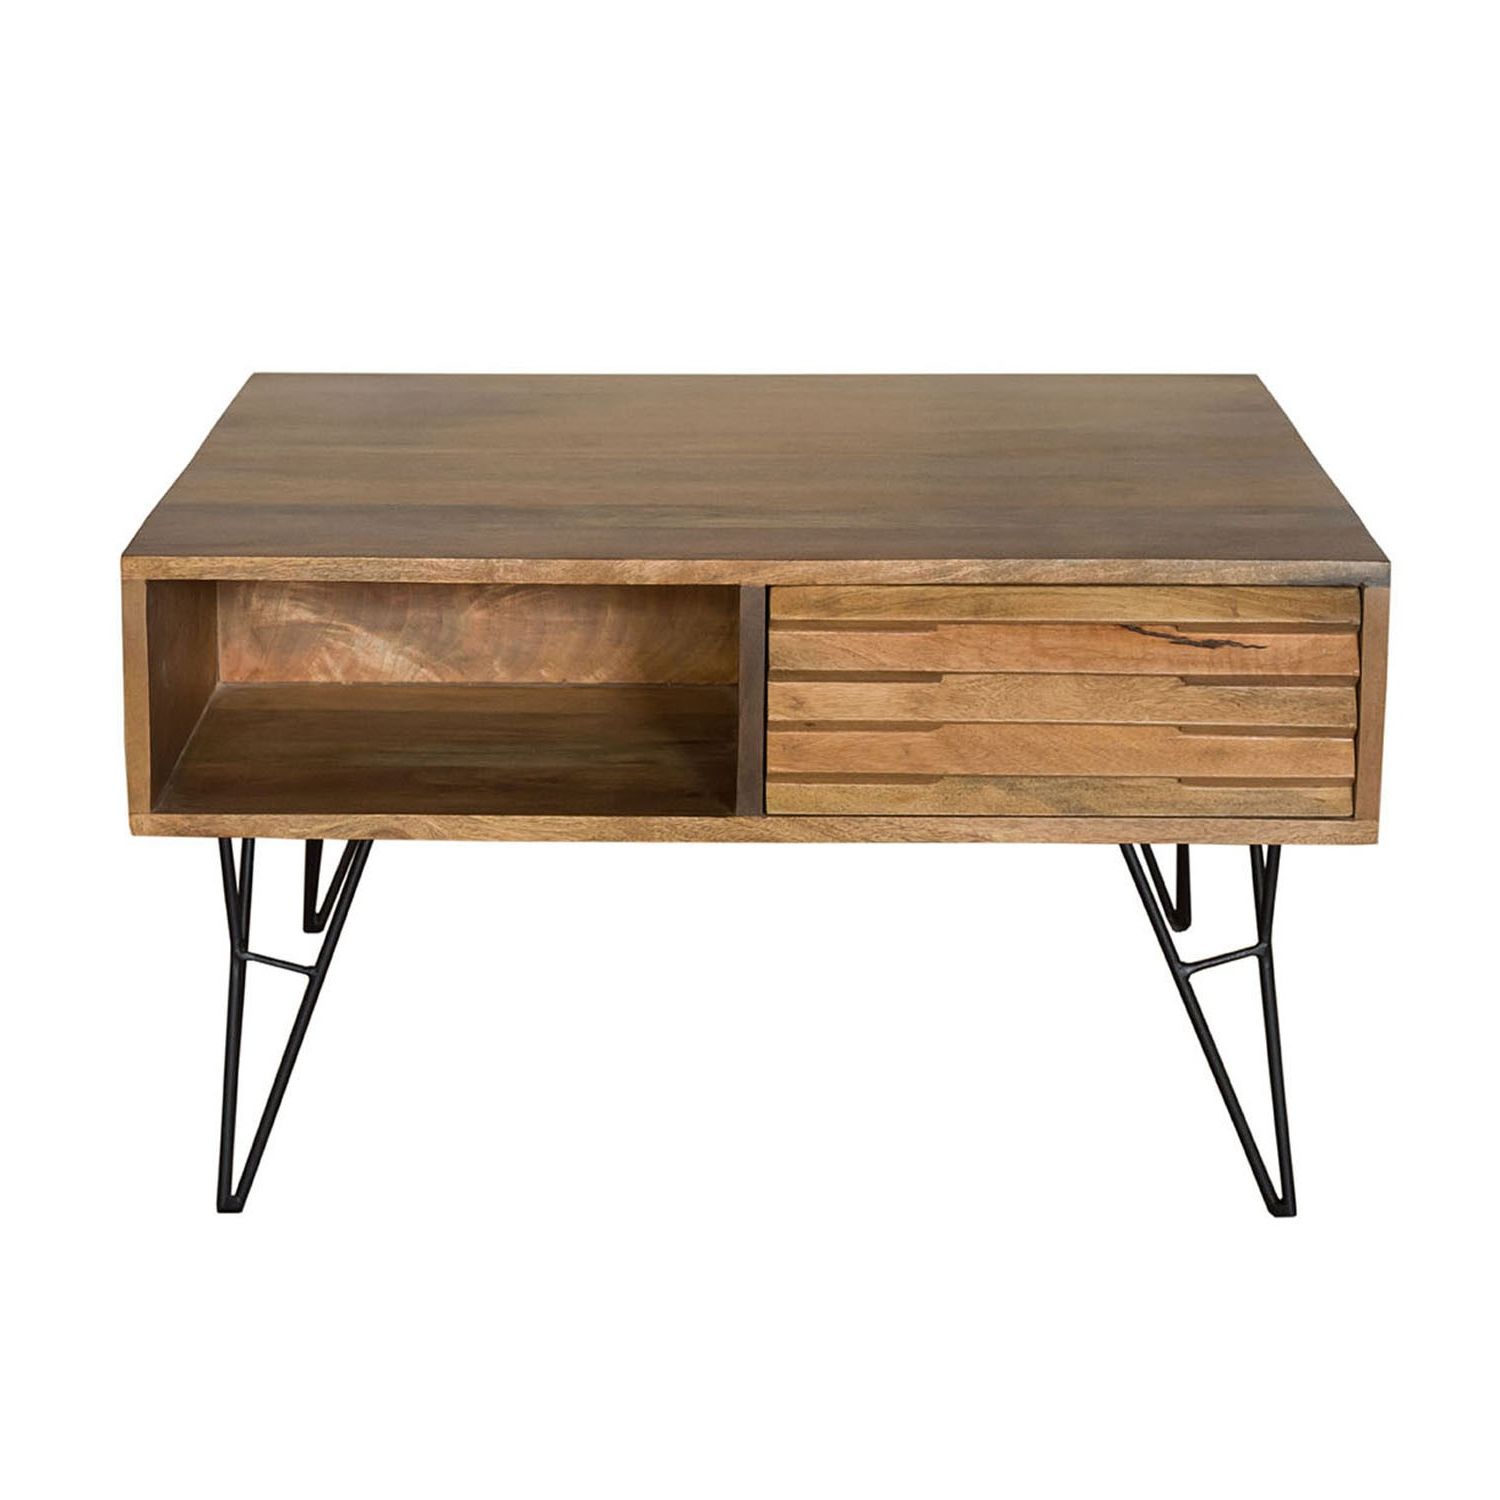 Widely Used Natural Mango Wood Coffee Tables With Shutter Coffee Table/iron & Mango Wood/natural Finish/ (View 13 of 20)